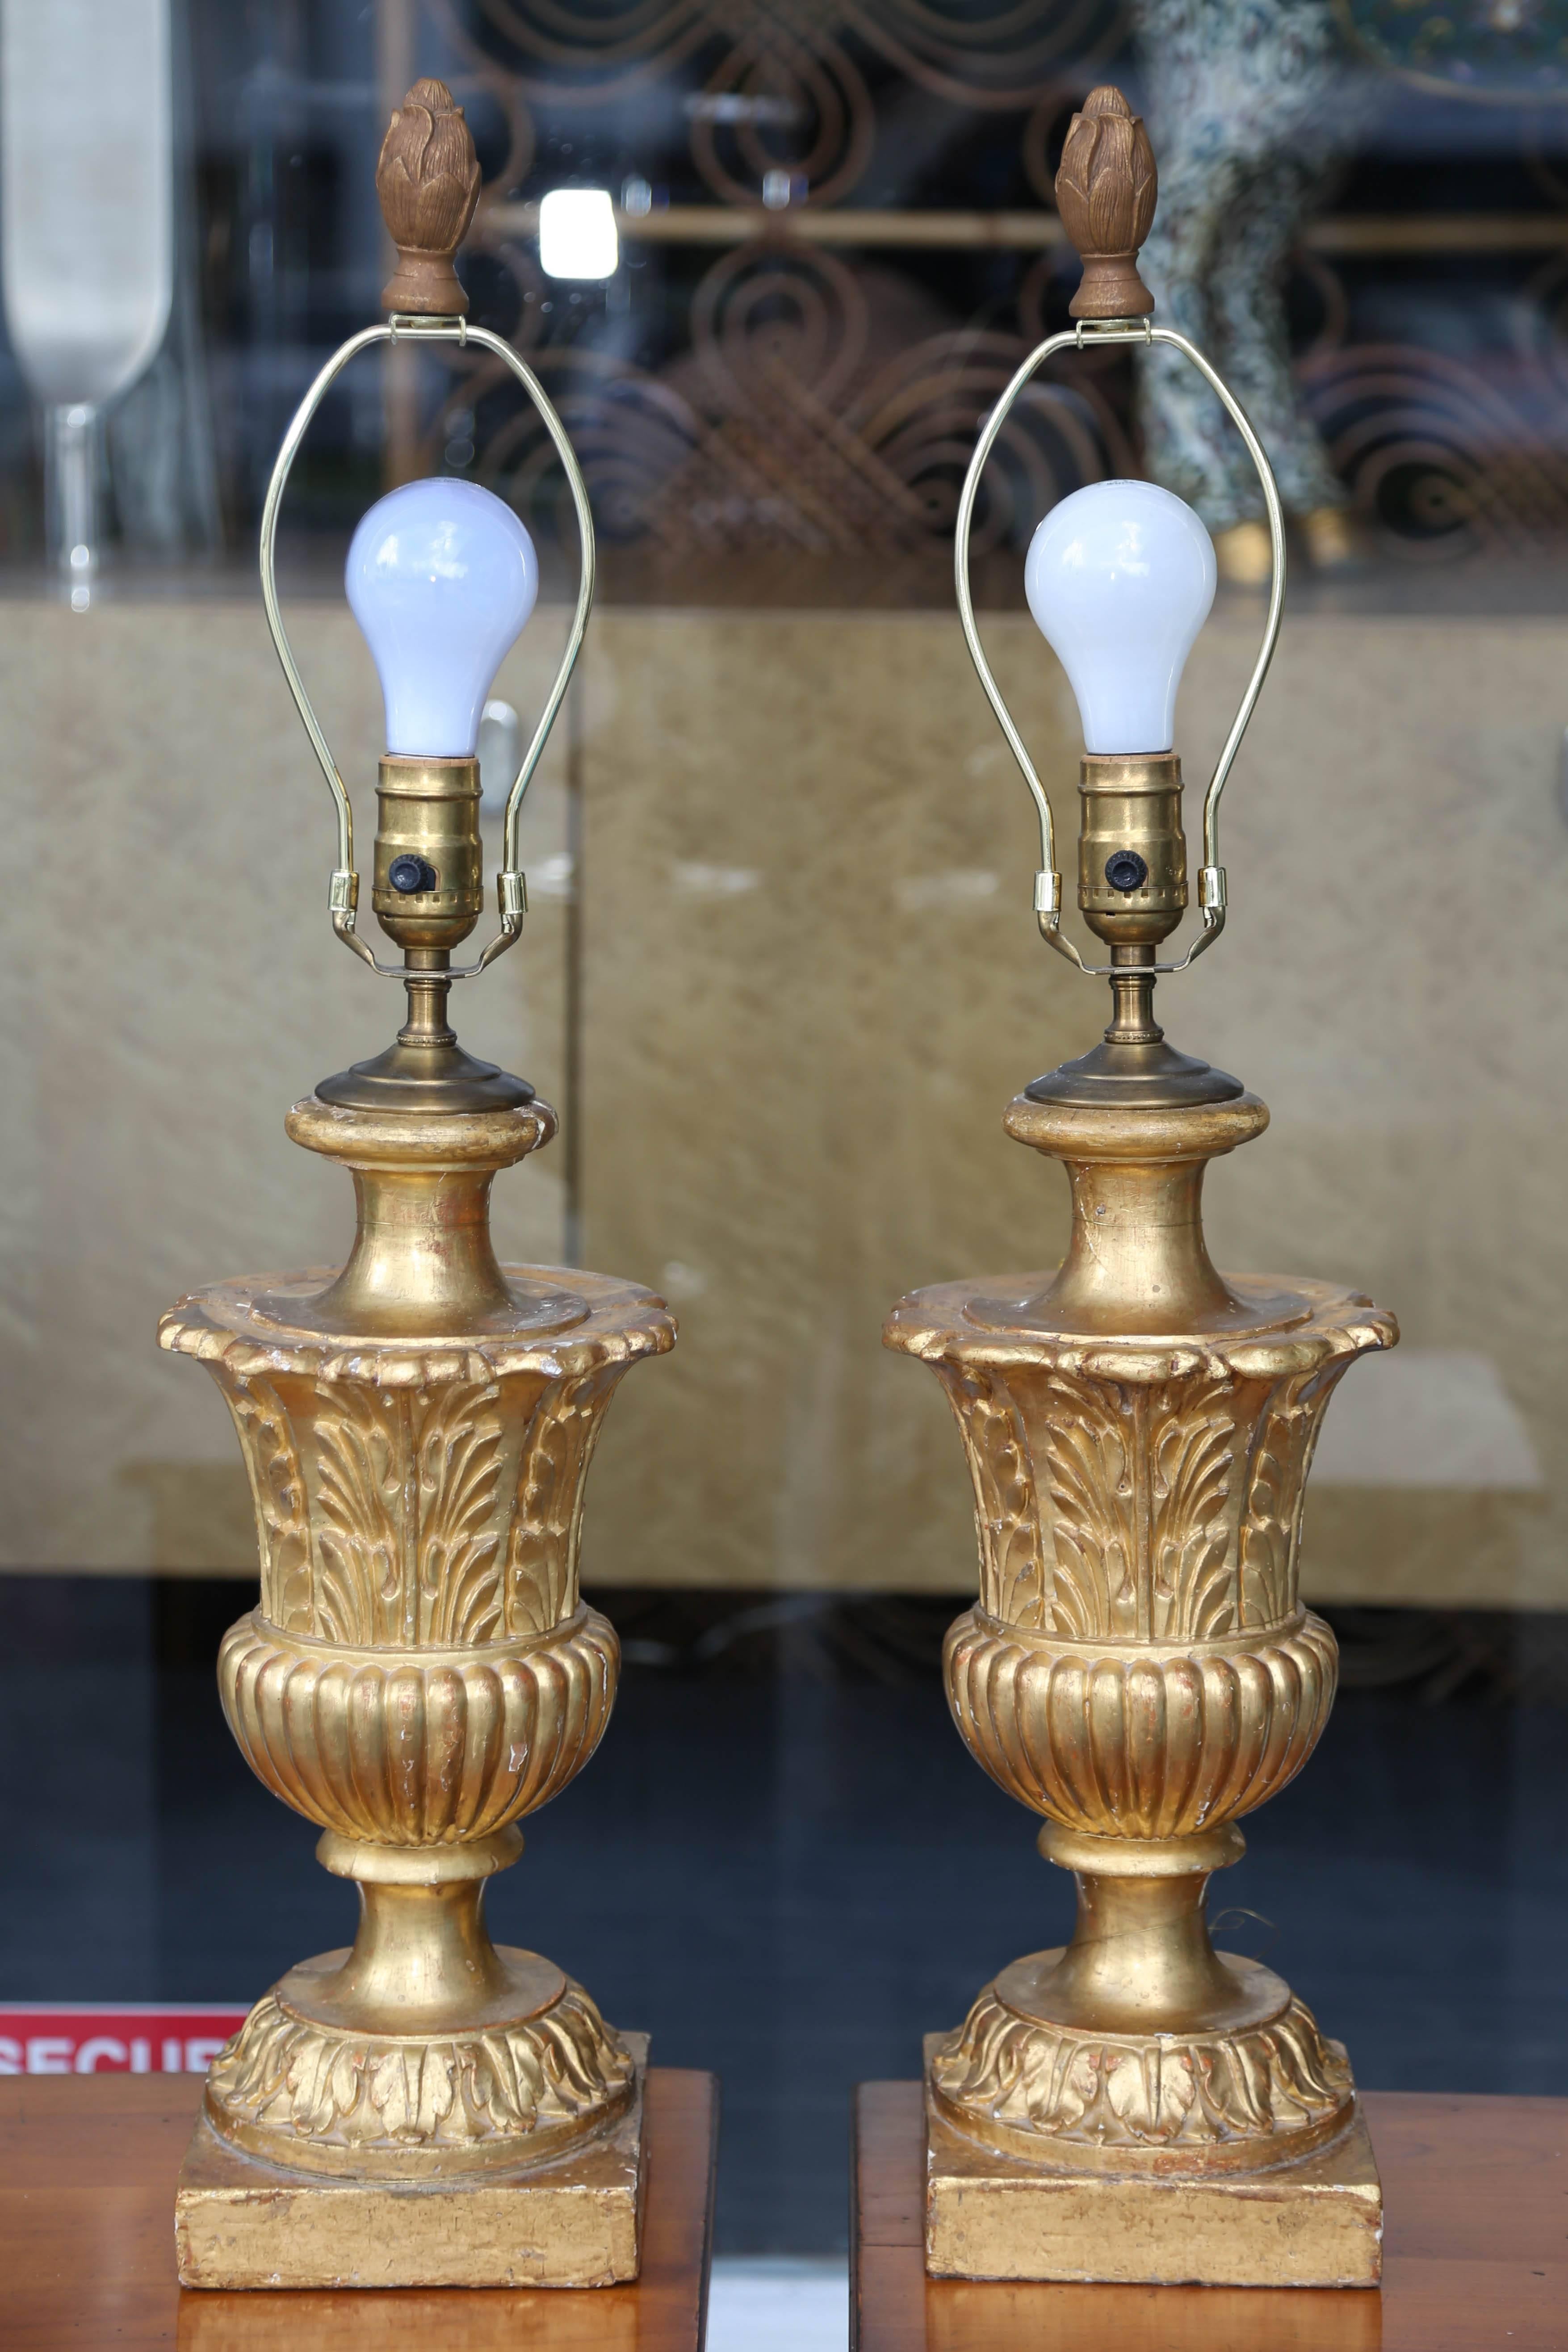 Fine Pair of 19th Century Neoclassic Giltwood Urns Now Electrified 1